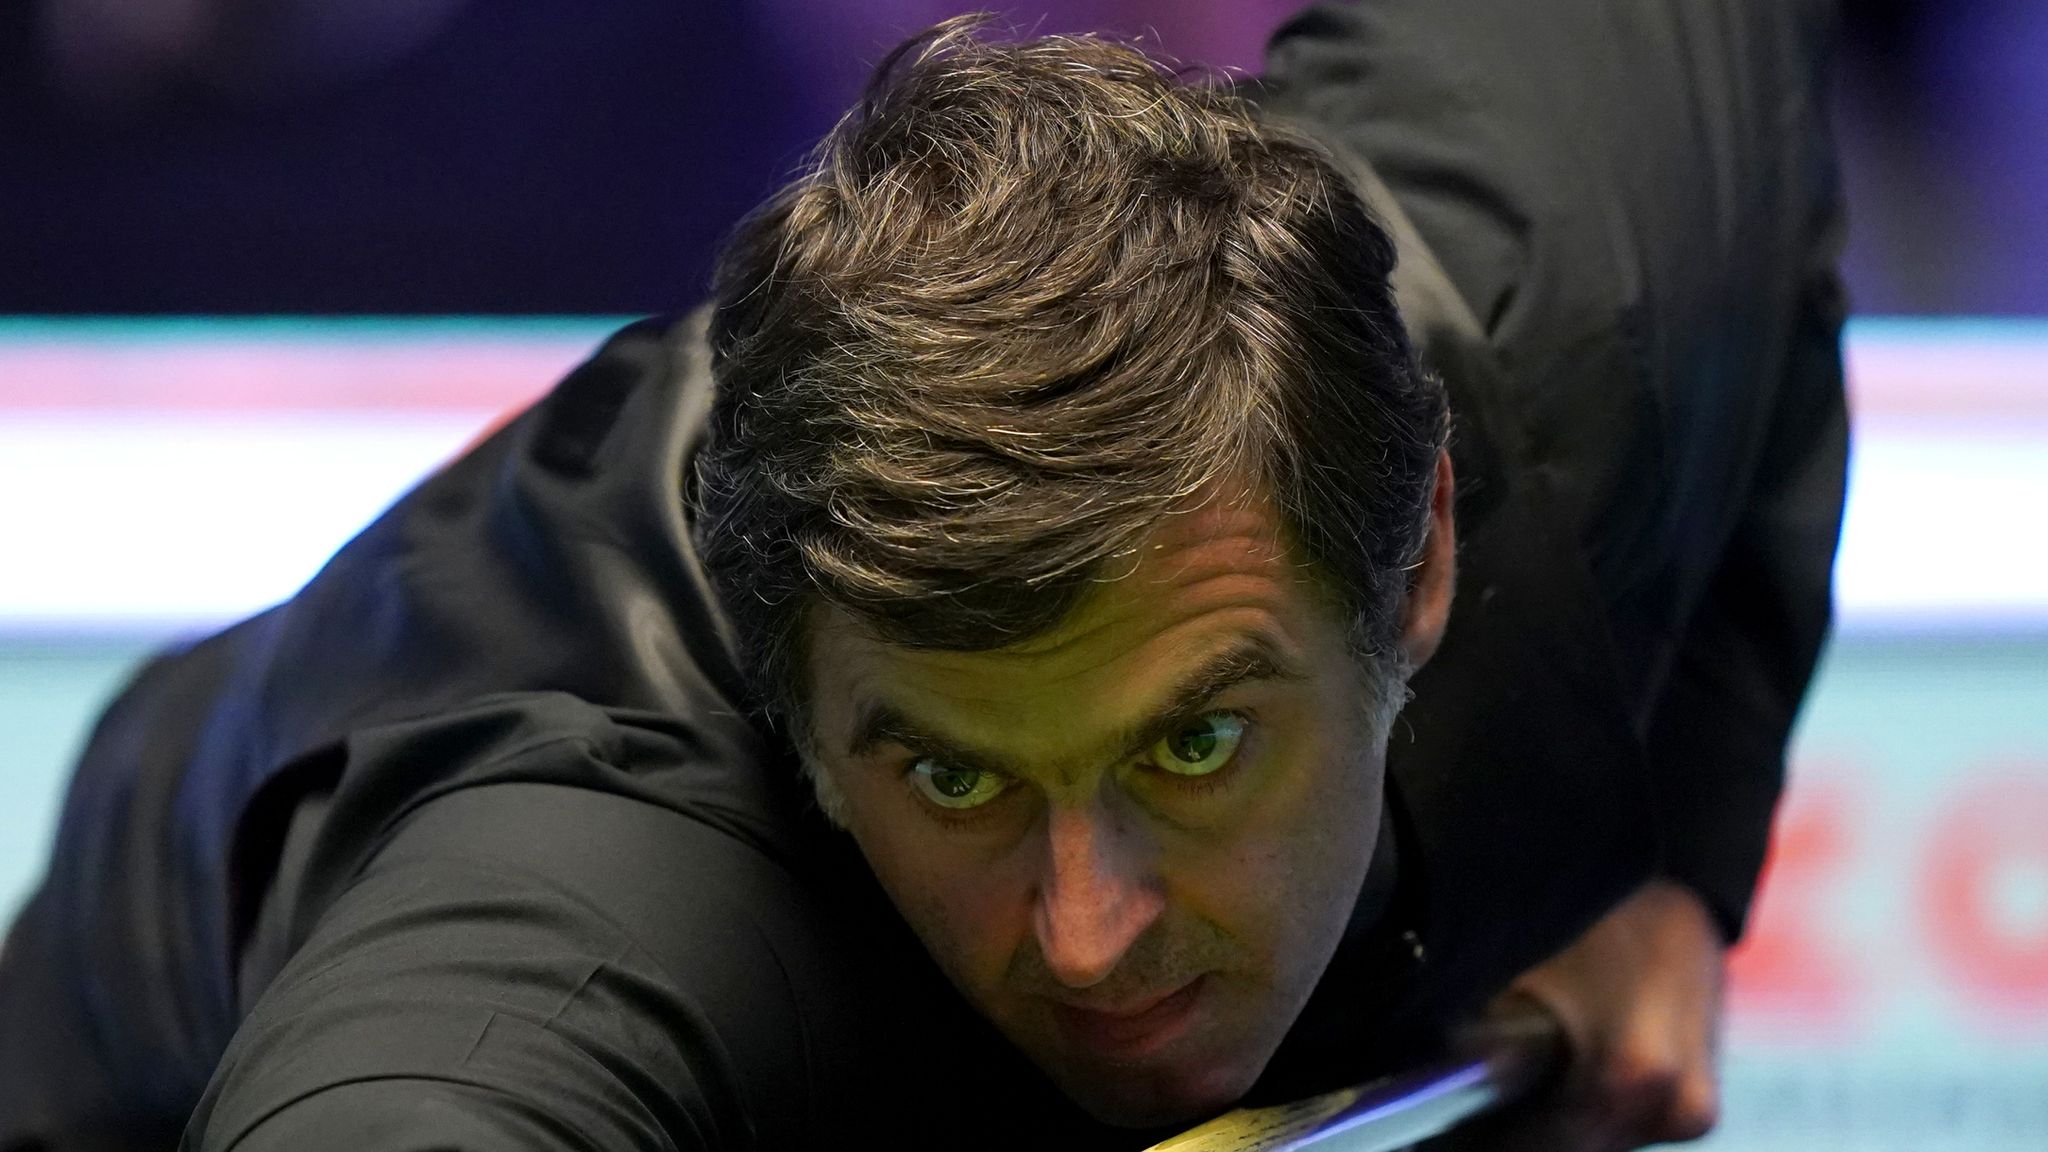 UK Championship Ronnie OSullivan thrashed 6-0 by Ding Junhui in quarter-finals in York Snooker News Sky Sports